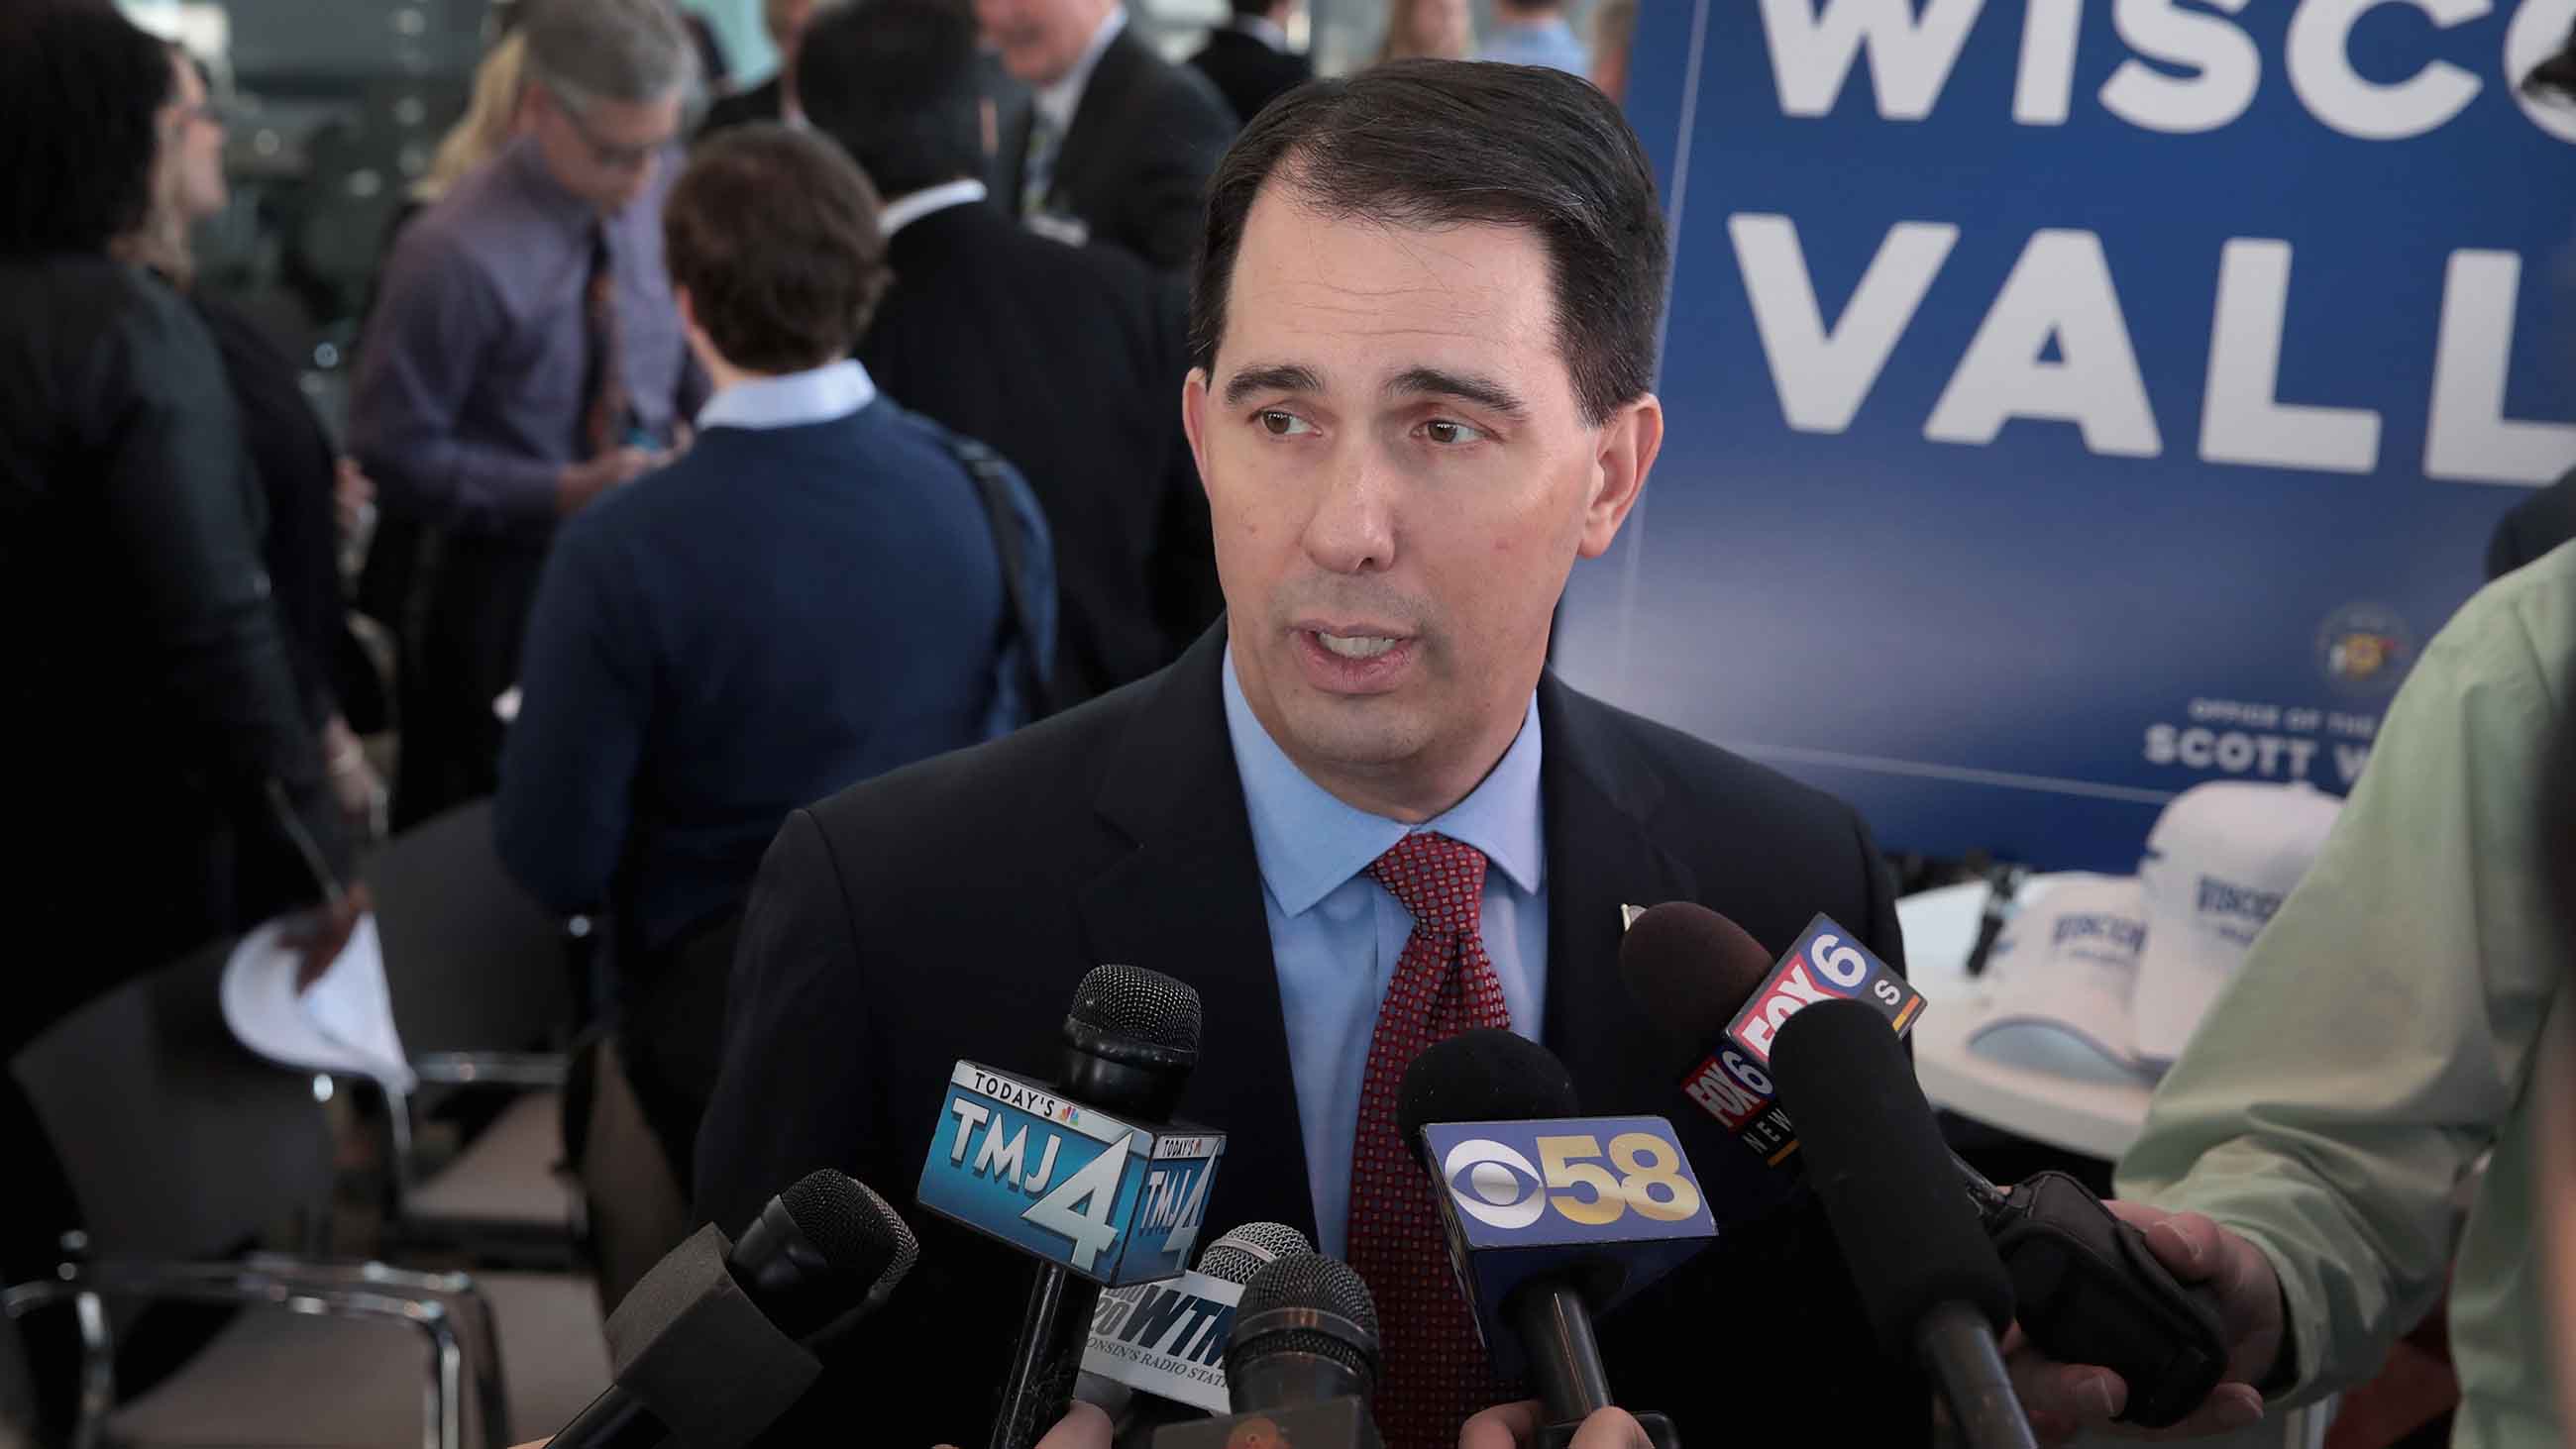 Wisconsin Governor Scott Walker is building his re-election campaign on bringing Taiwanese electronics manufacturer Foxconn to the state.